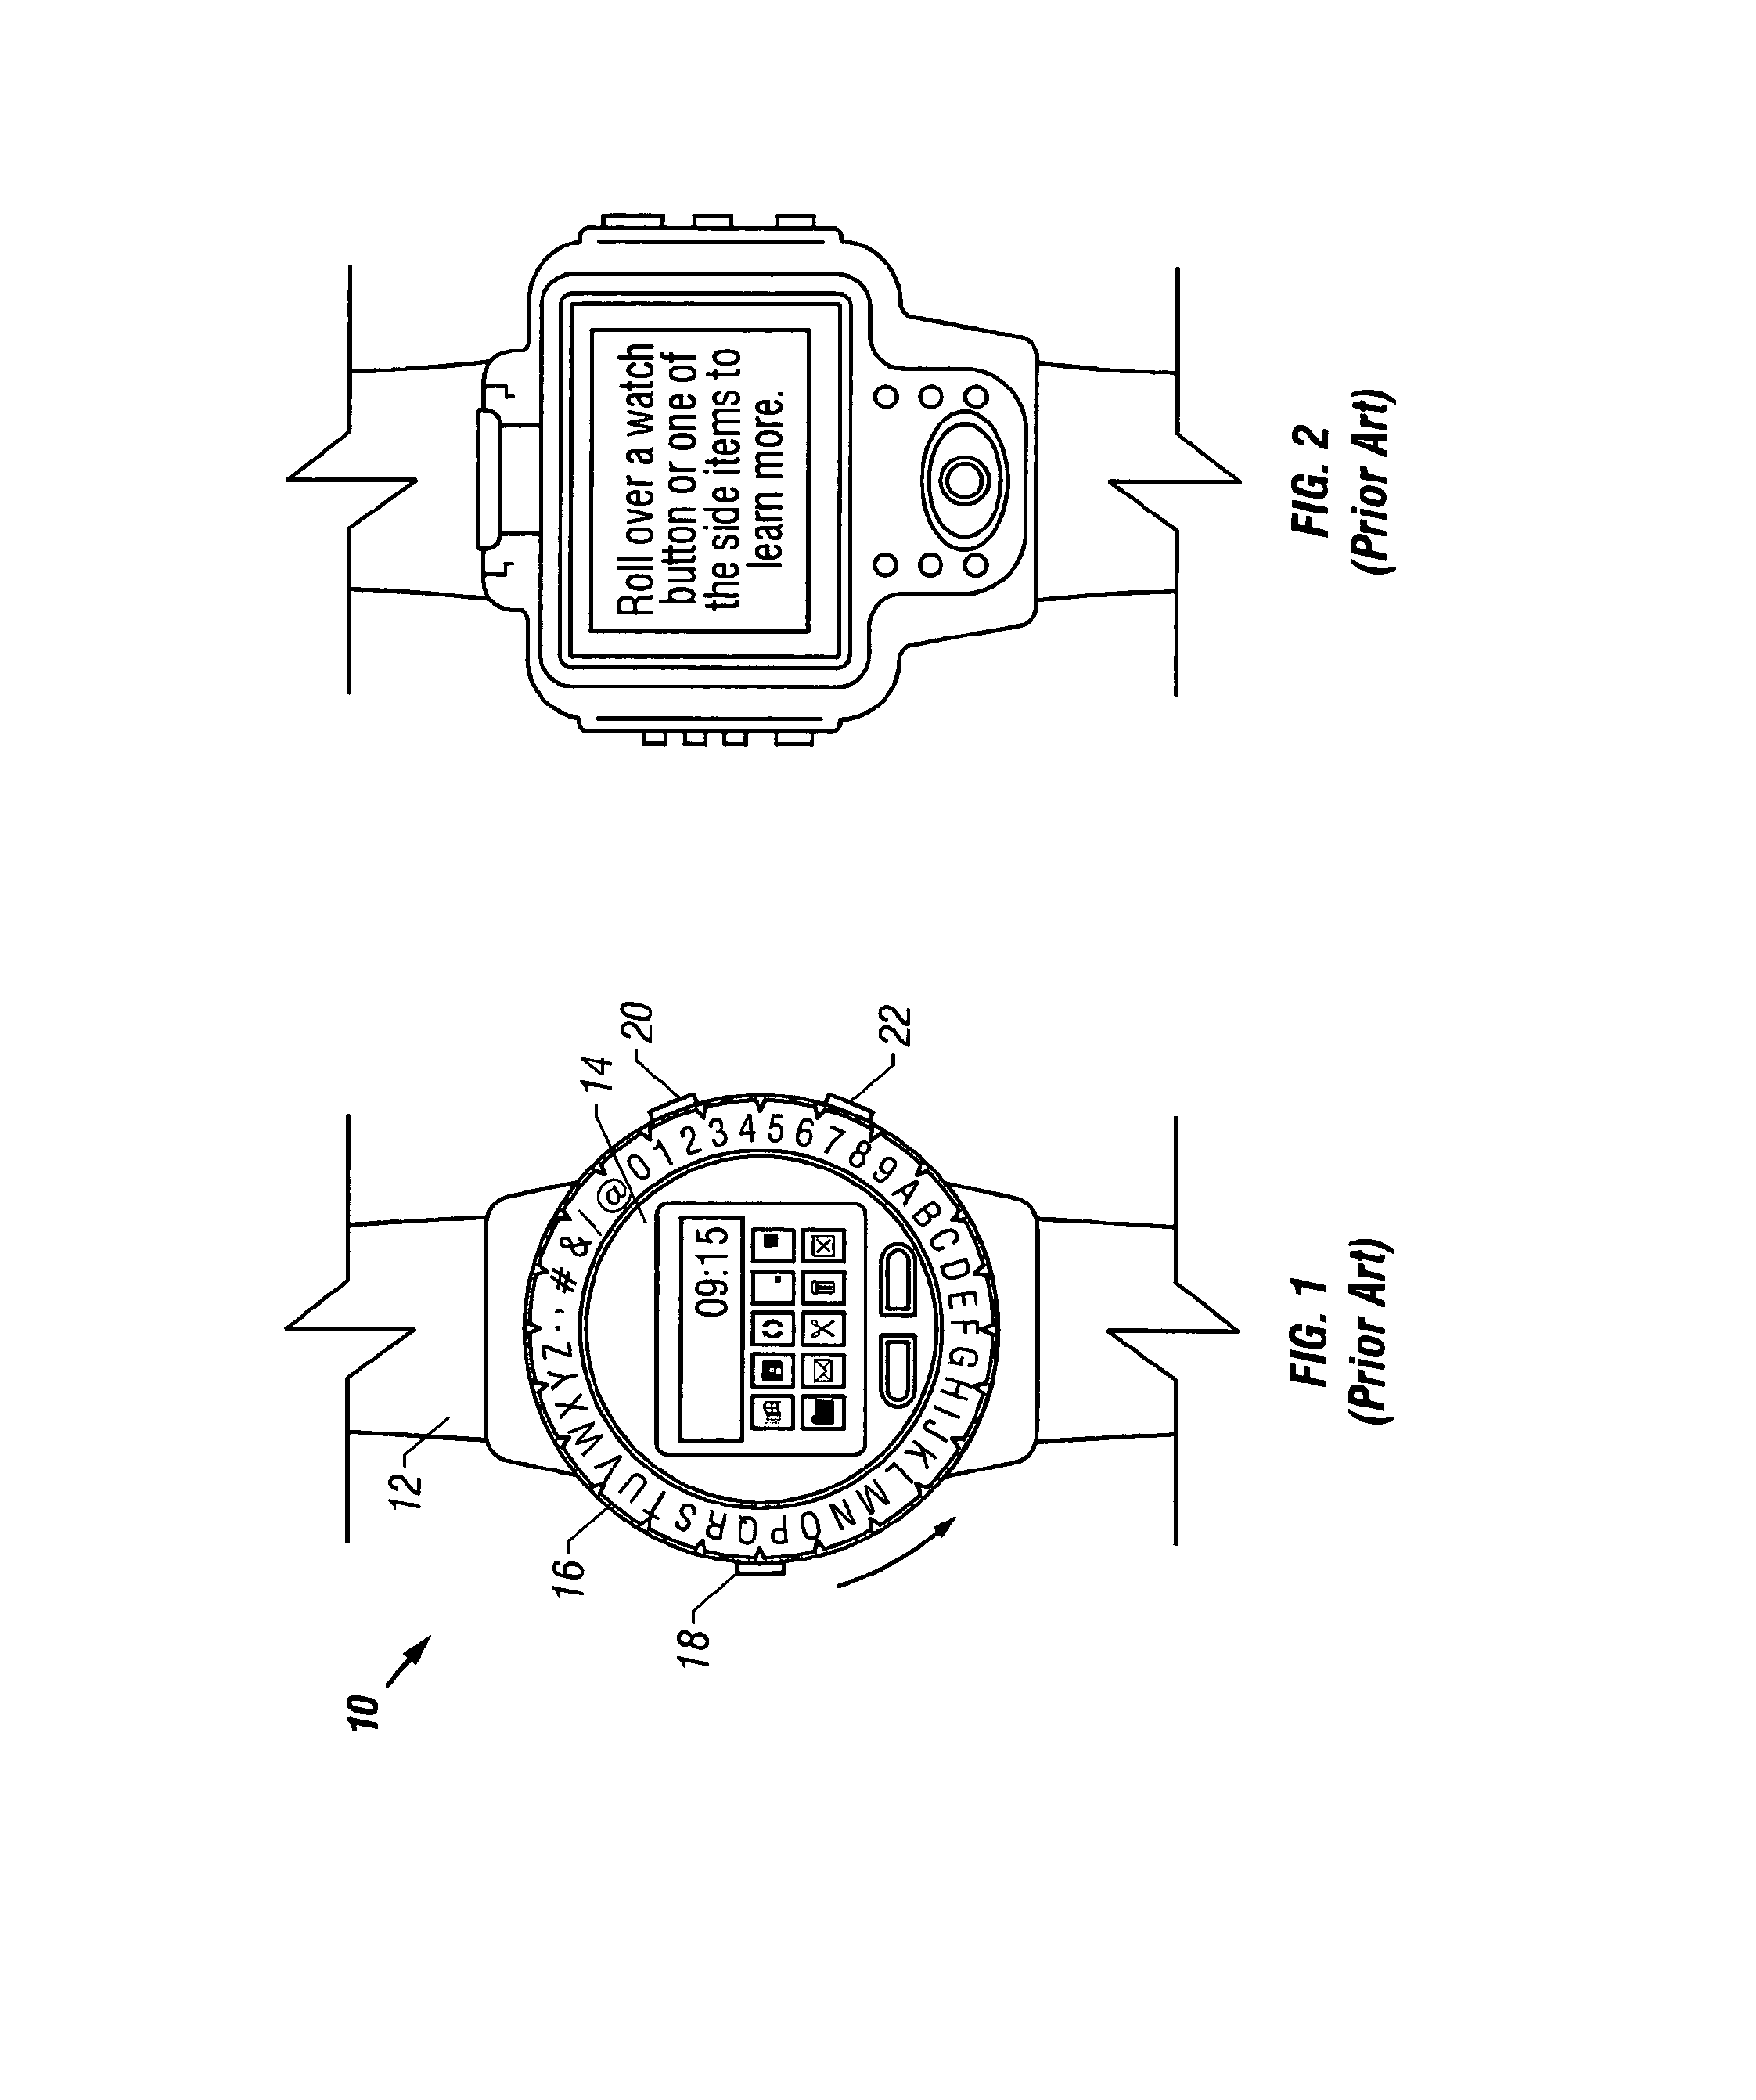 Method and apparatus for synchronizing data between a watch and external digital device